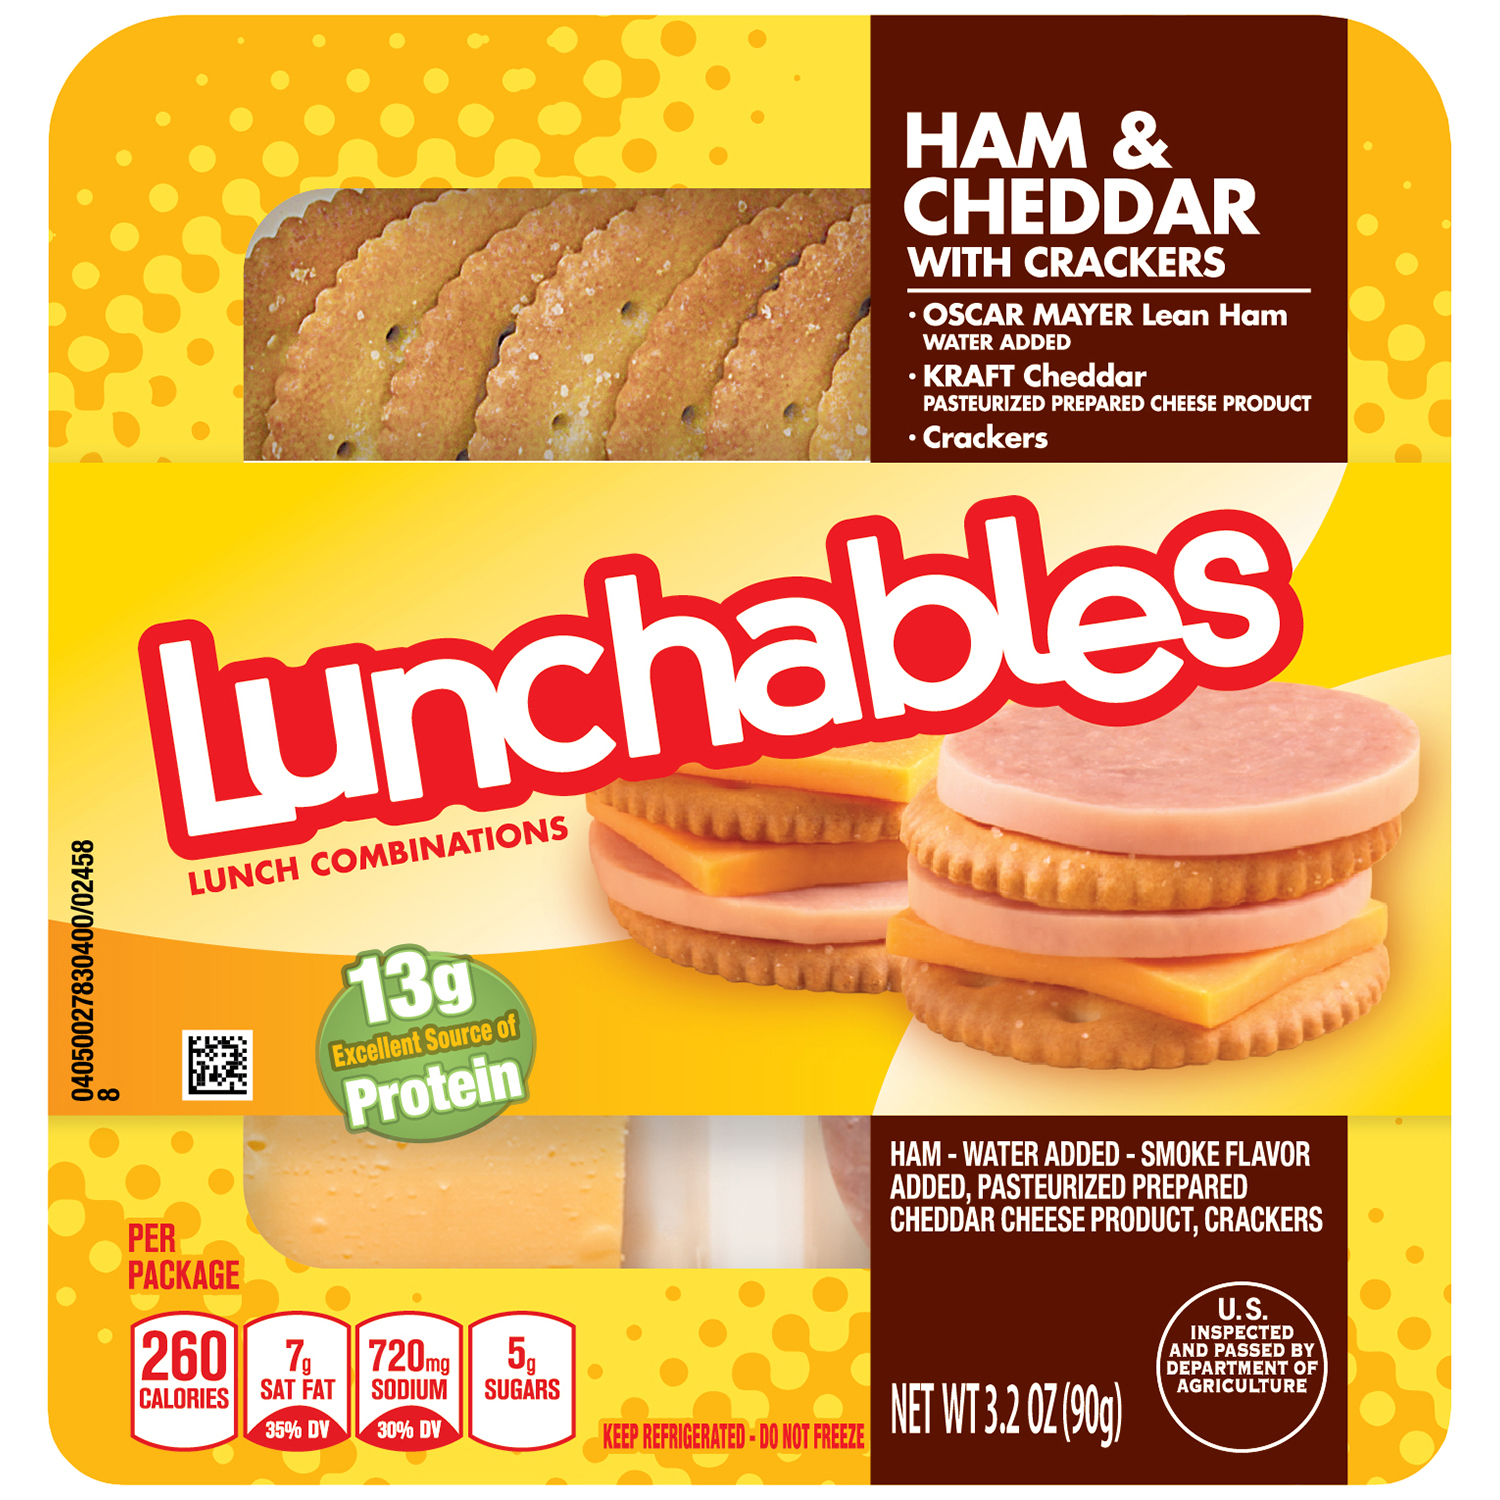 UPC 044700024584 product image for Ham & Cheddar with Crackers | upcitemdb.com